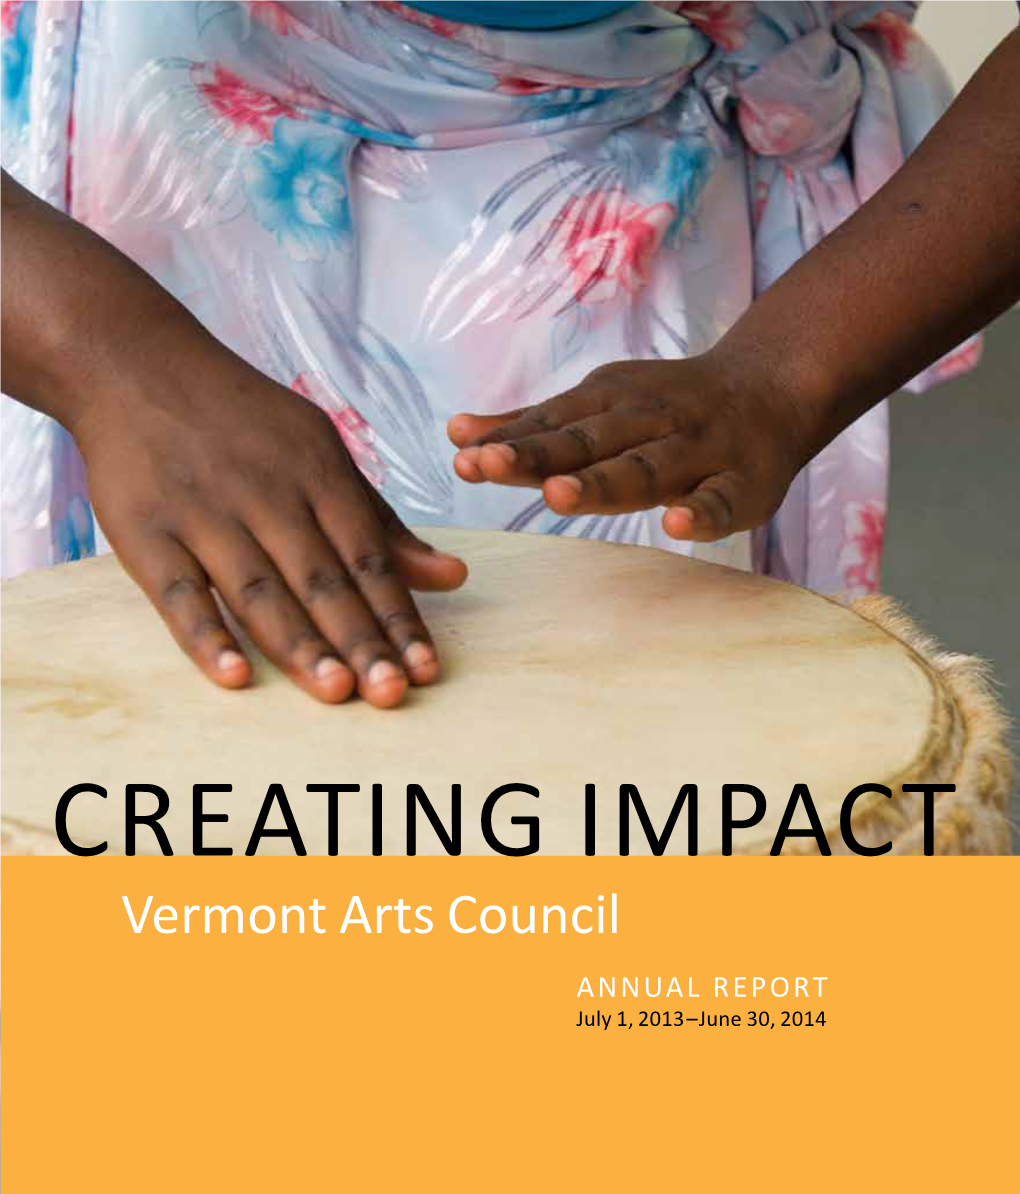 Annual Report July 1, 2013–June 30, 2014 Vermont Arts Council